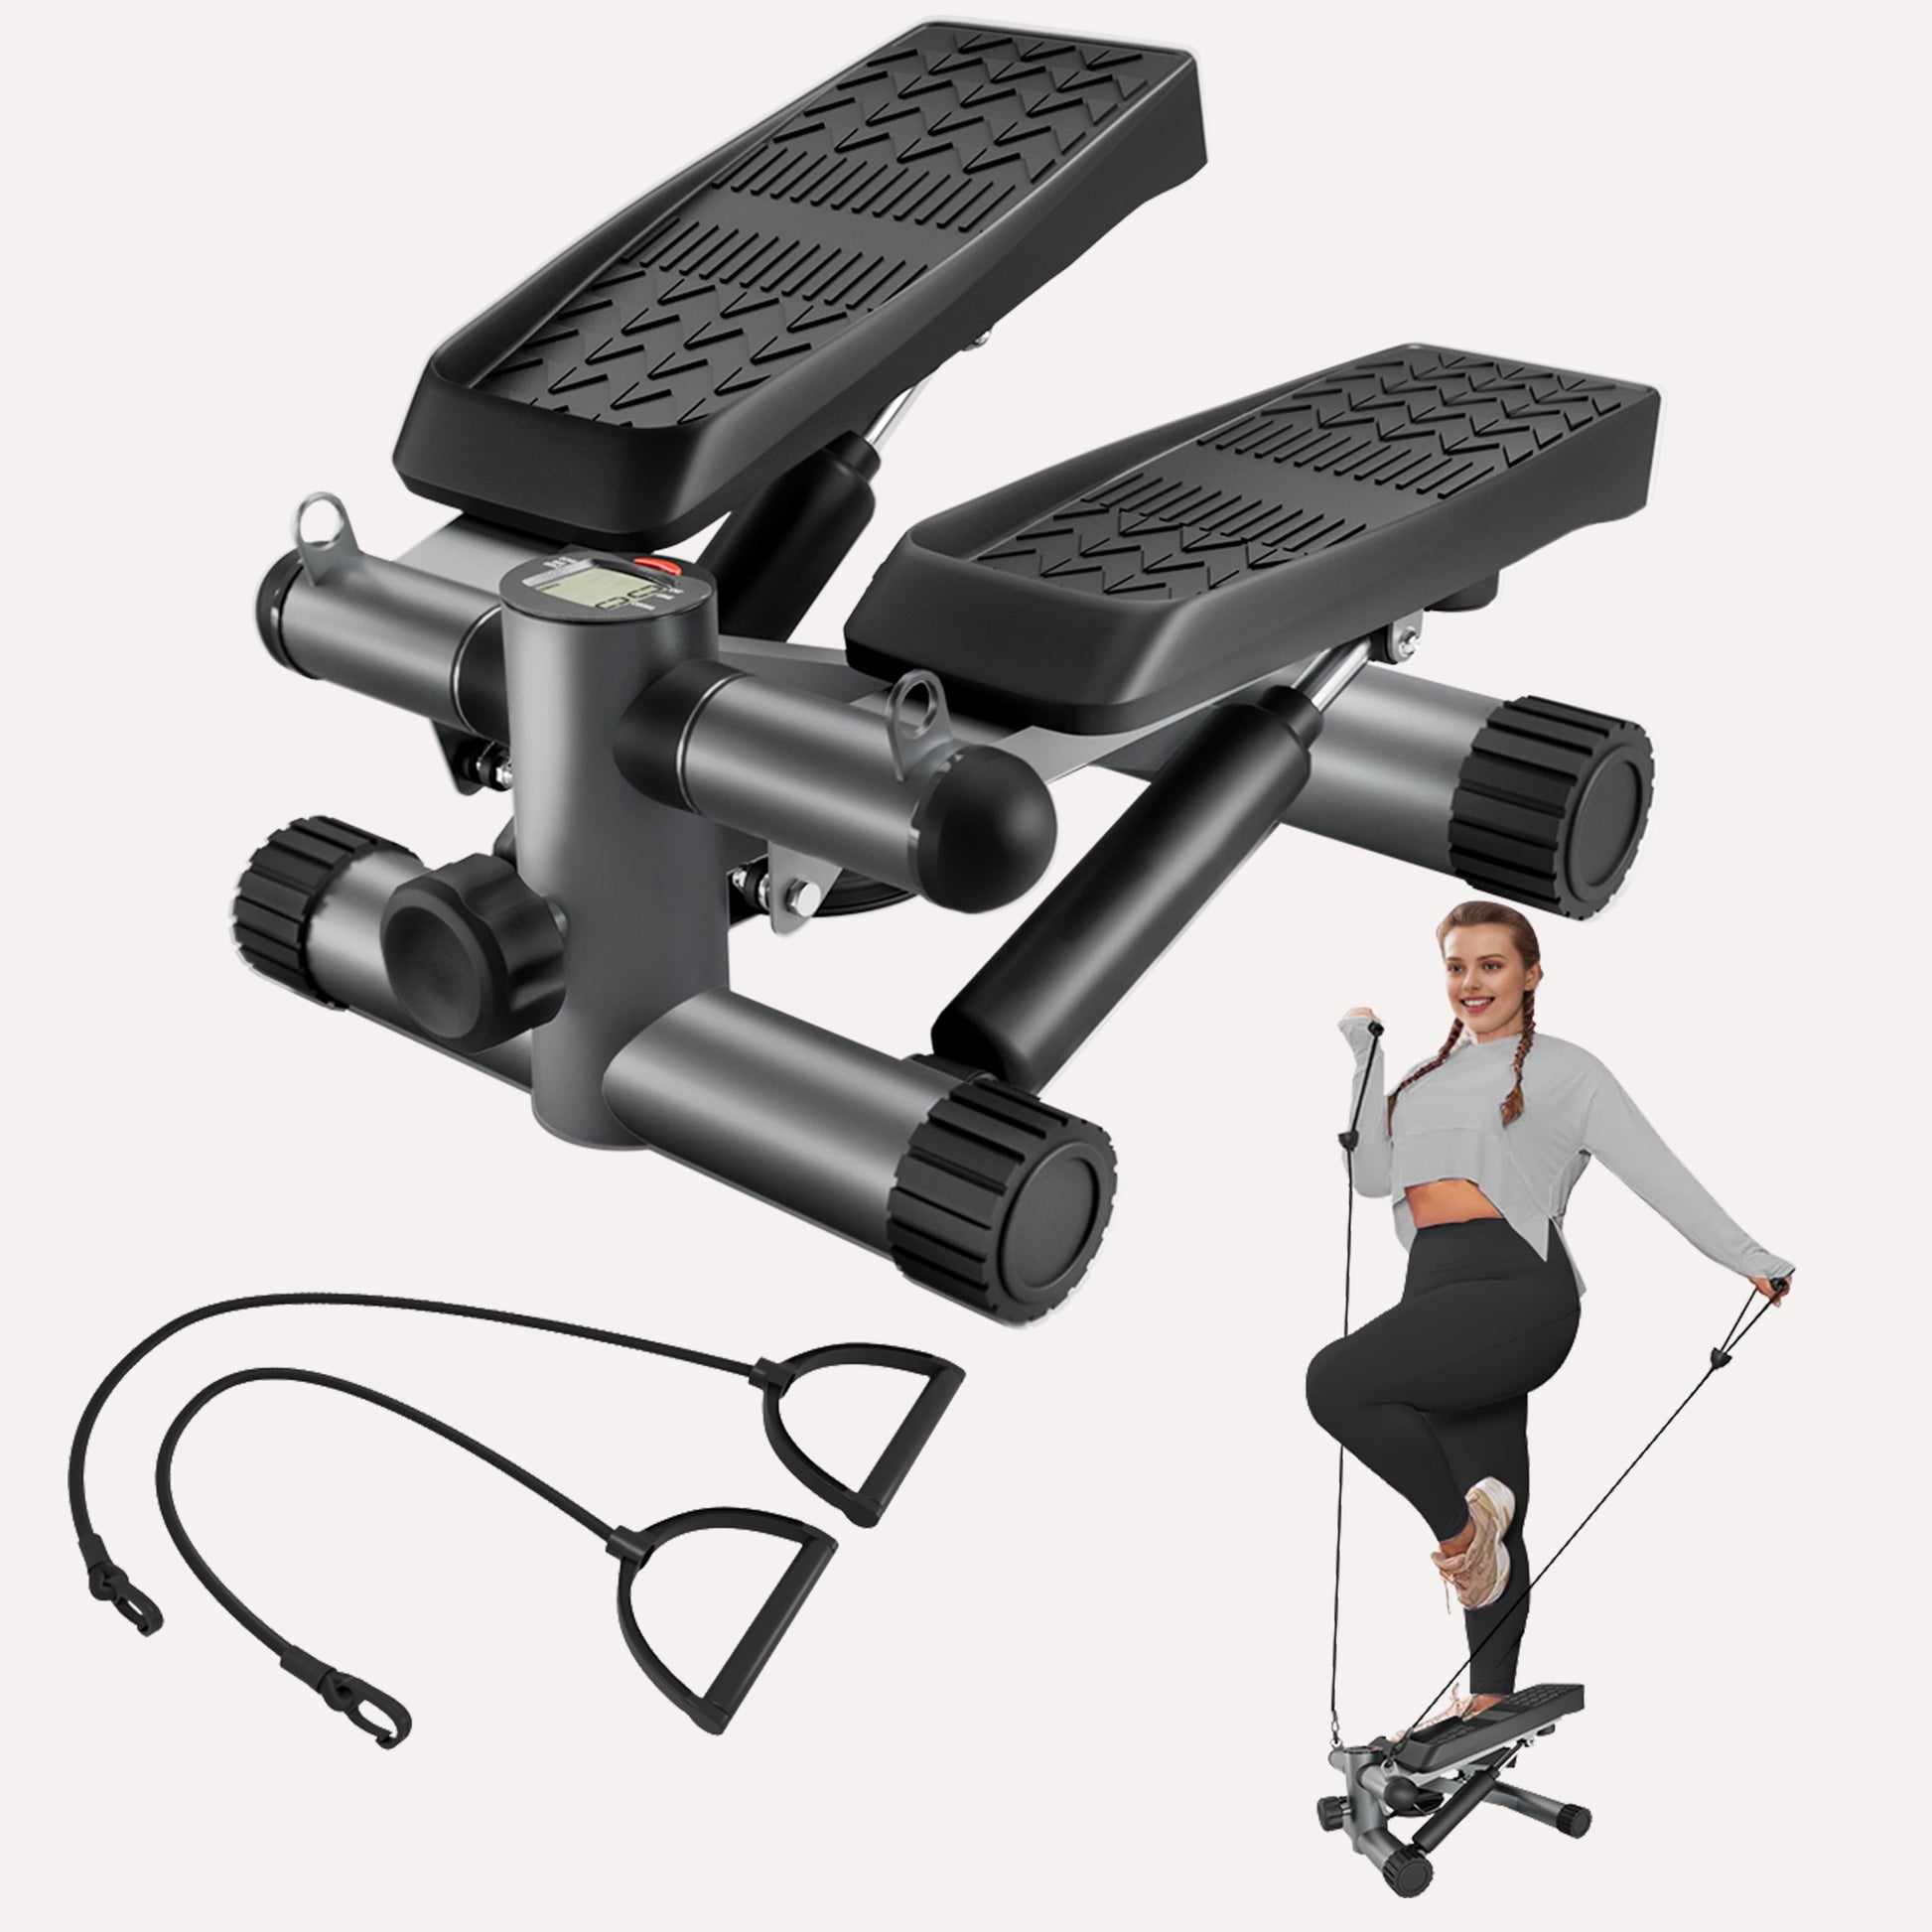 Steppers for Exercise, Stair Stepper with Resistance Bands, Mini Stepper with 330LBS Loading Capacity, Hydraulic Fitness Stepper with LCD Monitor